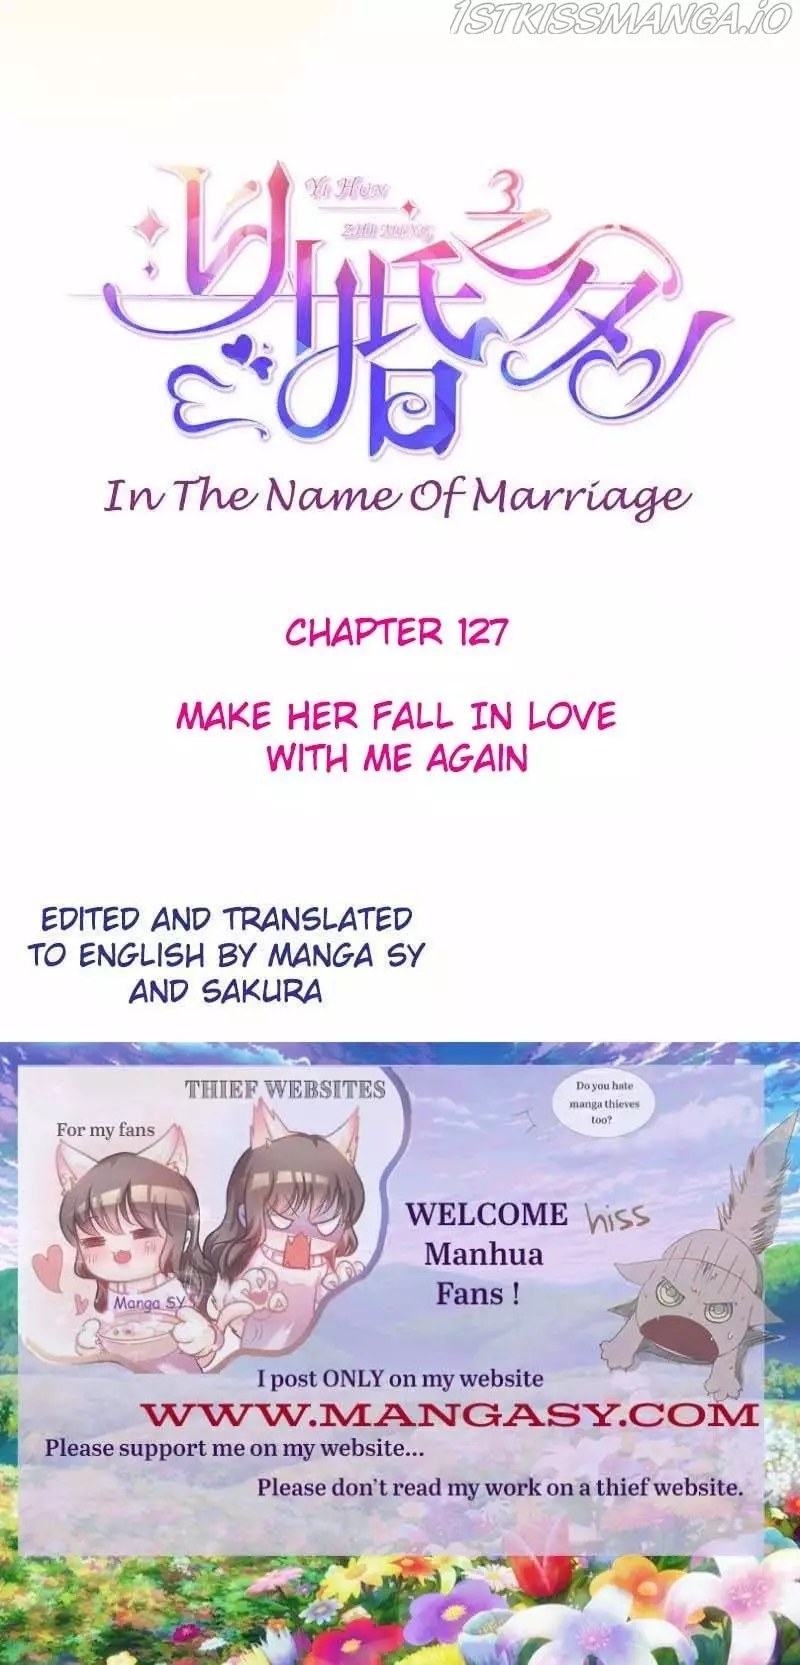 In The Name Of Marriage - 127 page 1-9d9ee25f